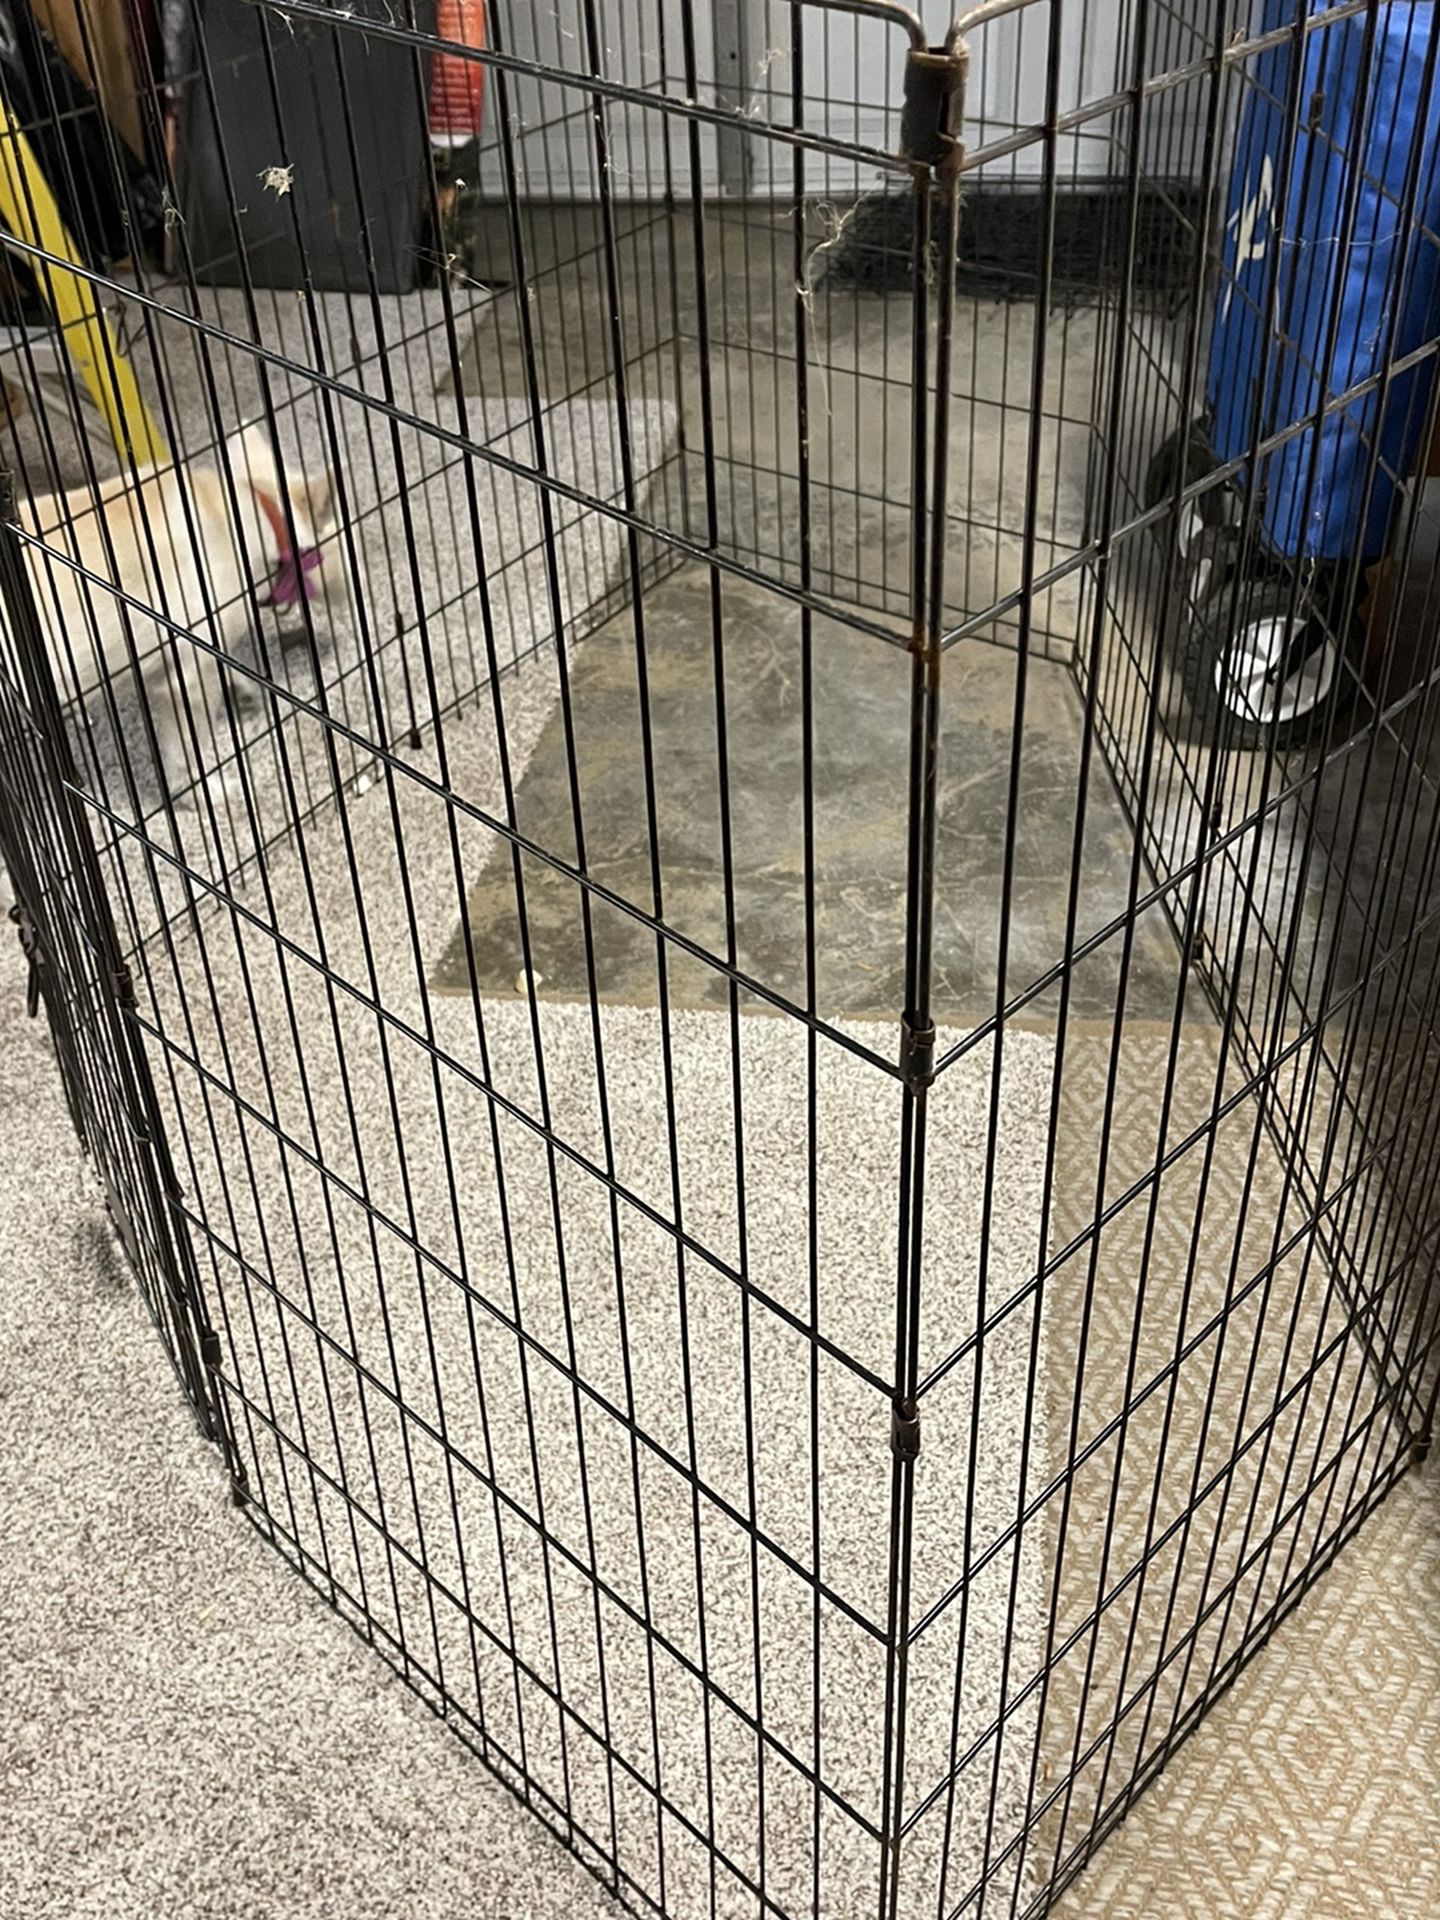 Huge Dog Crate Corral Make Any Size